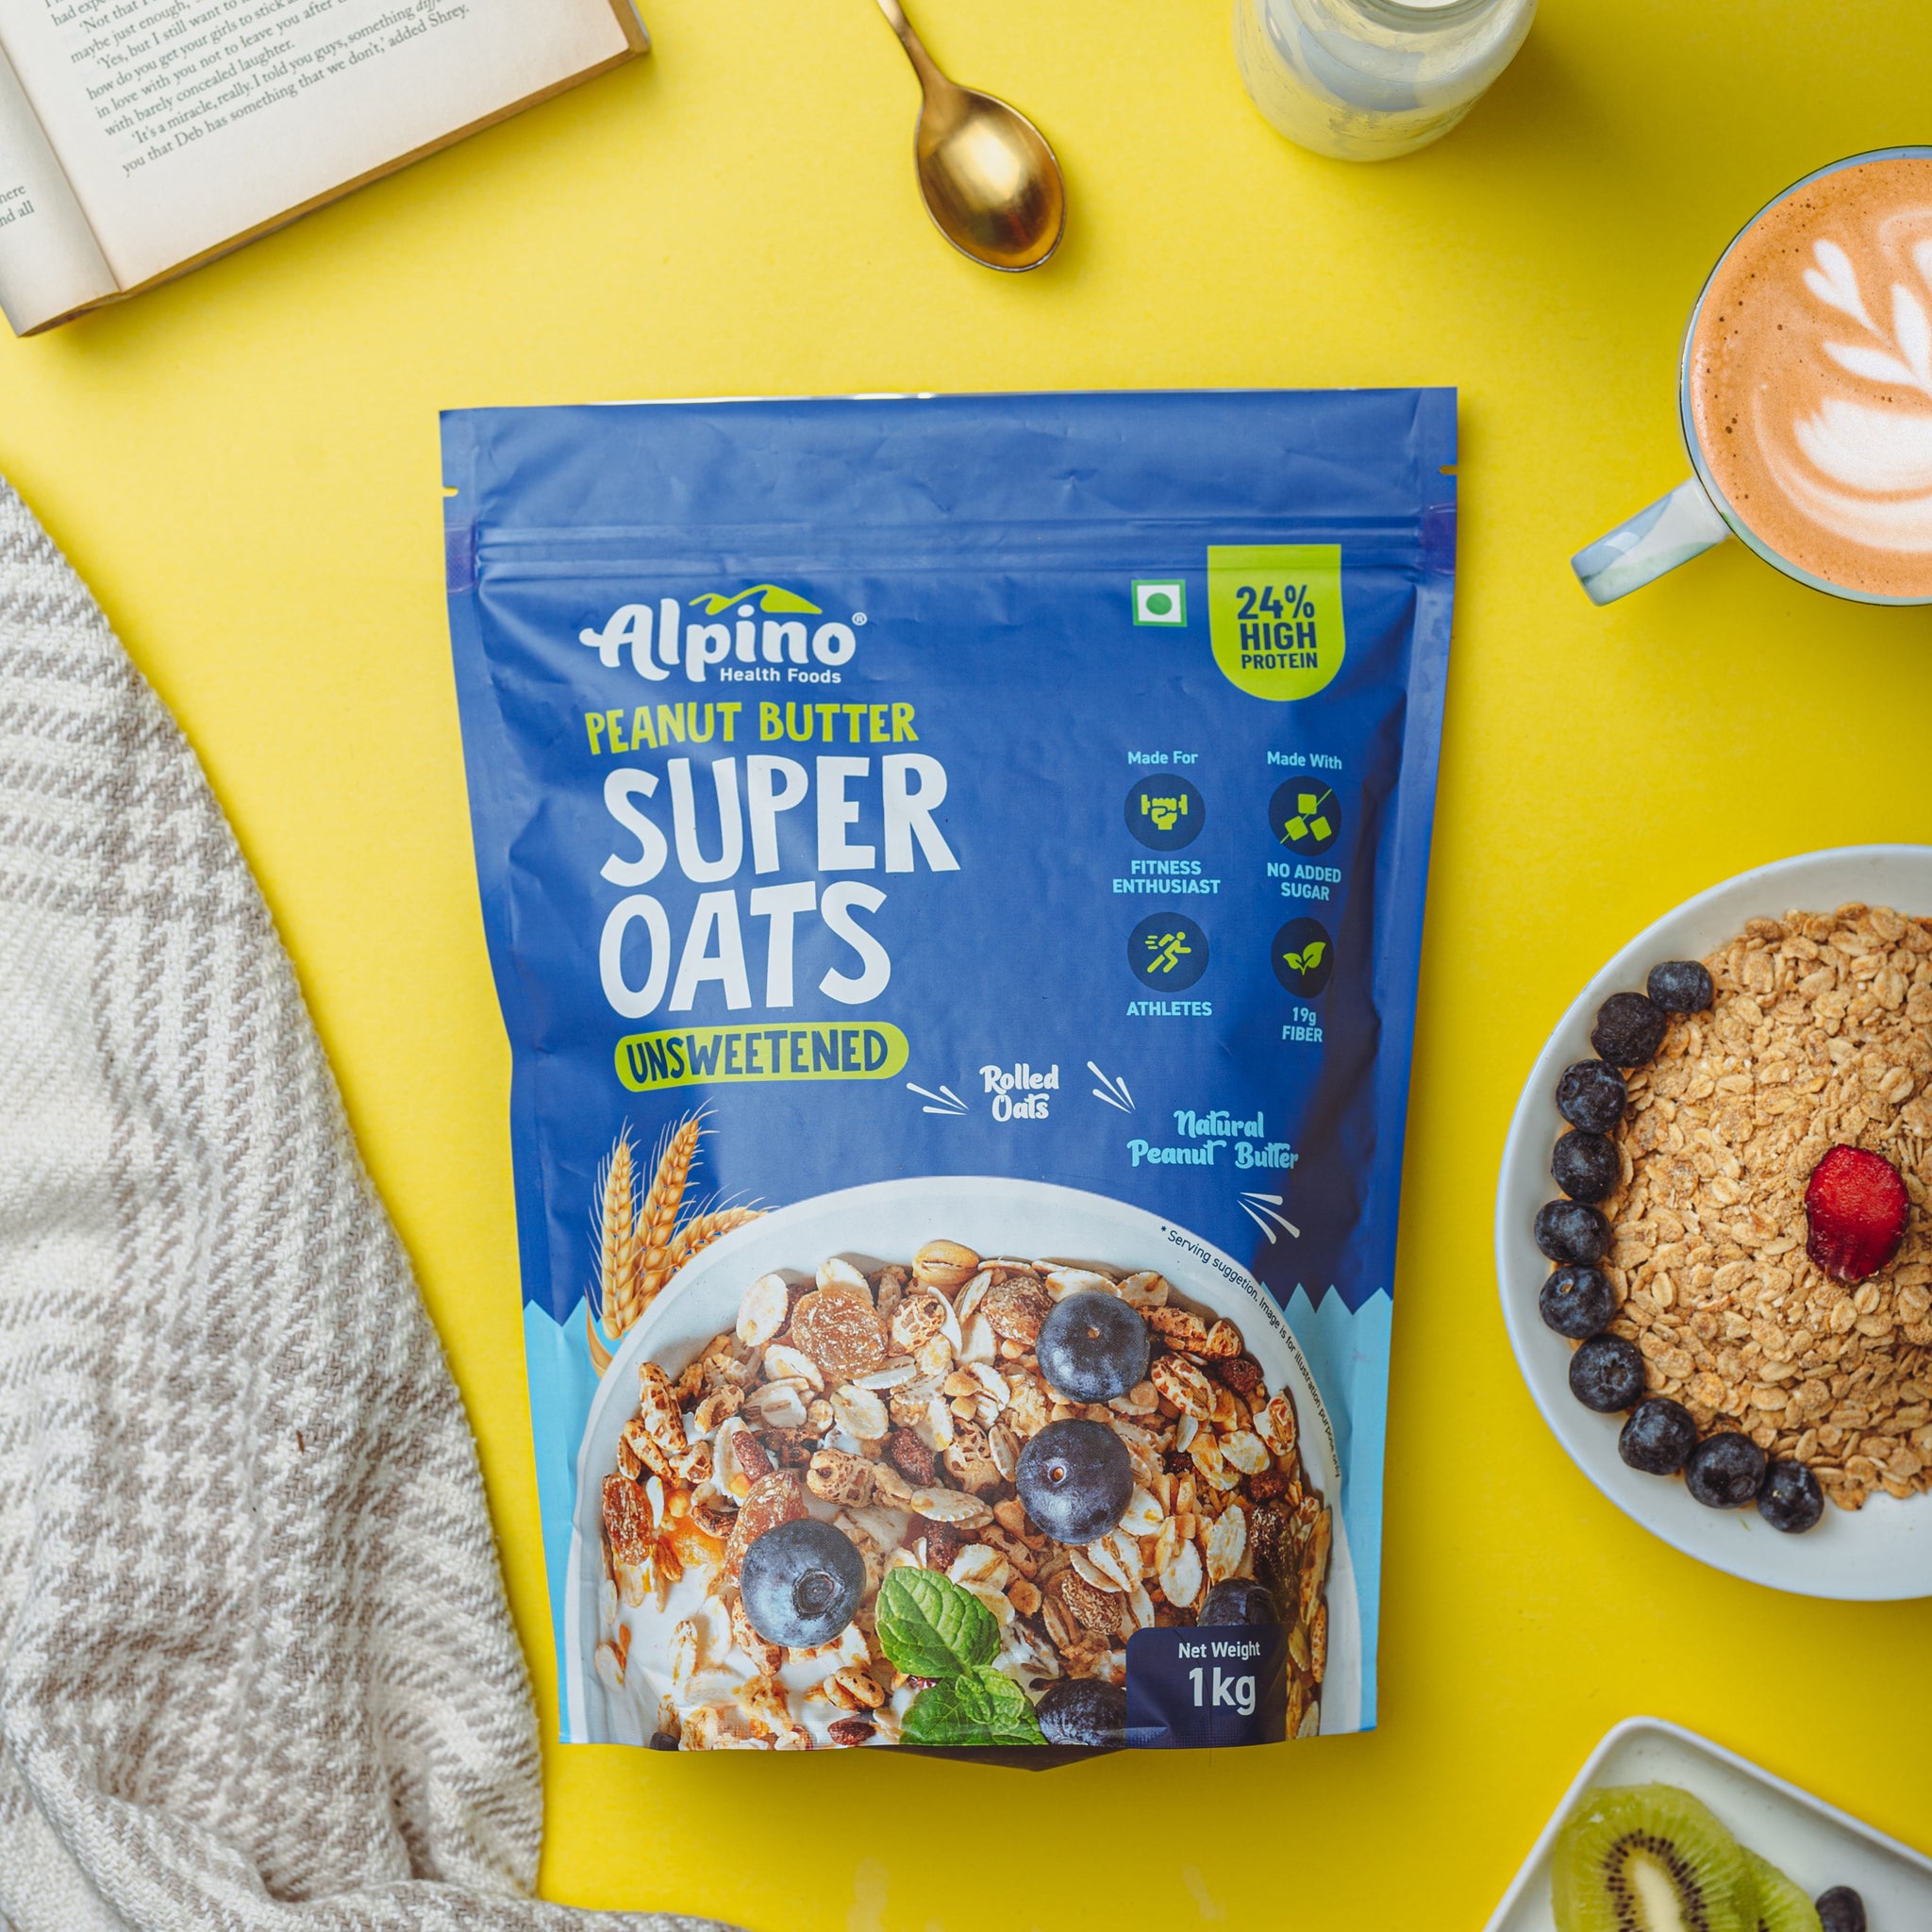 5 Easy and Healthy Oats Recipes Using ALPINO PEANUT BUTTER SUPER OATS